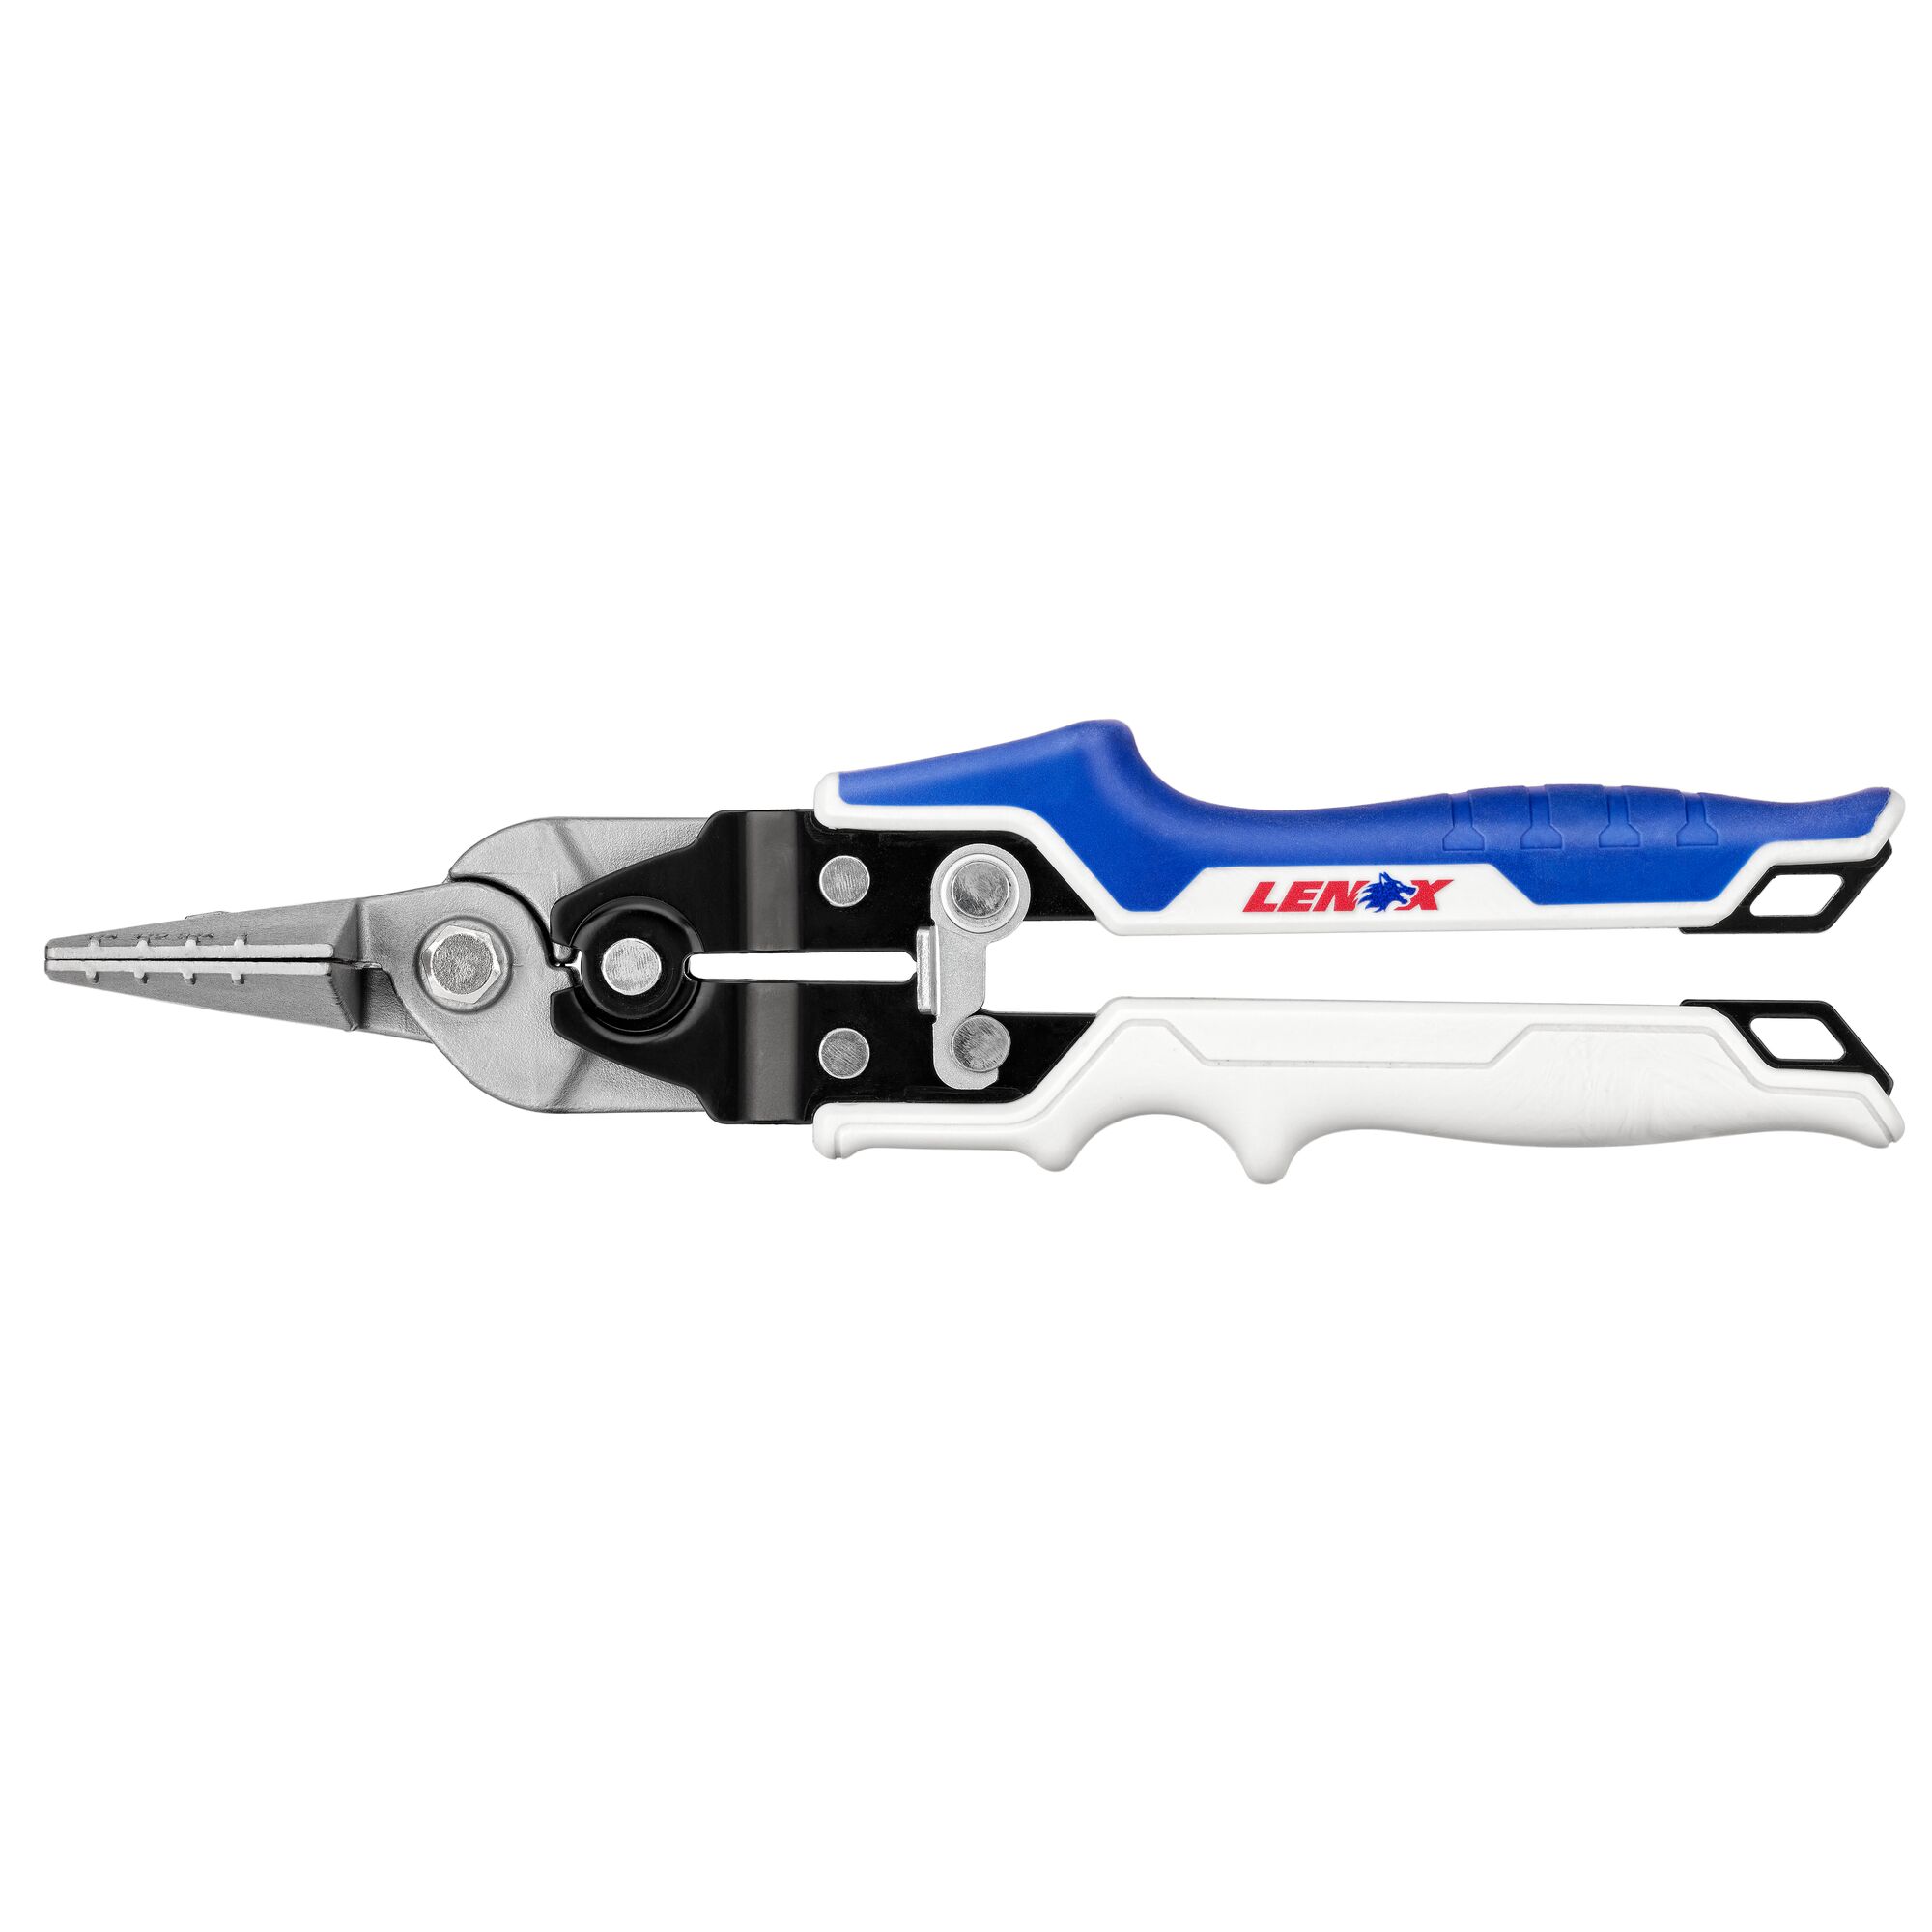 LENOX Forged Steel Snips in the Tin Snips department at Lowes.com